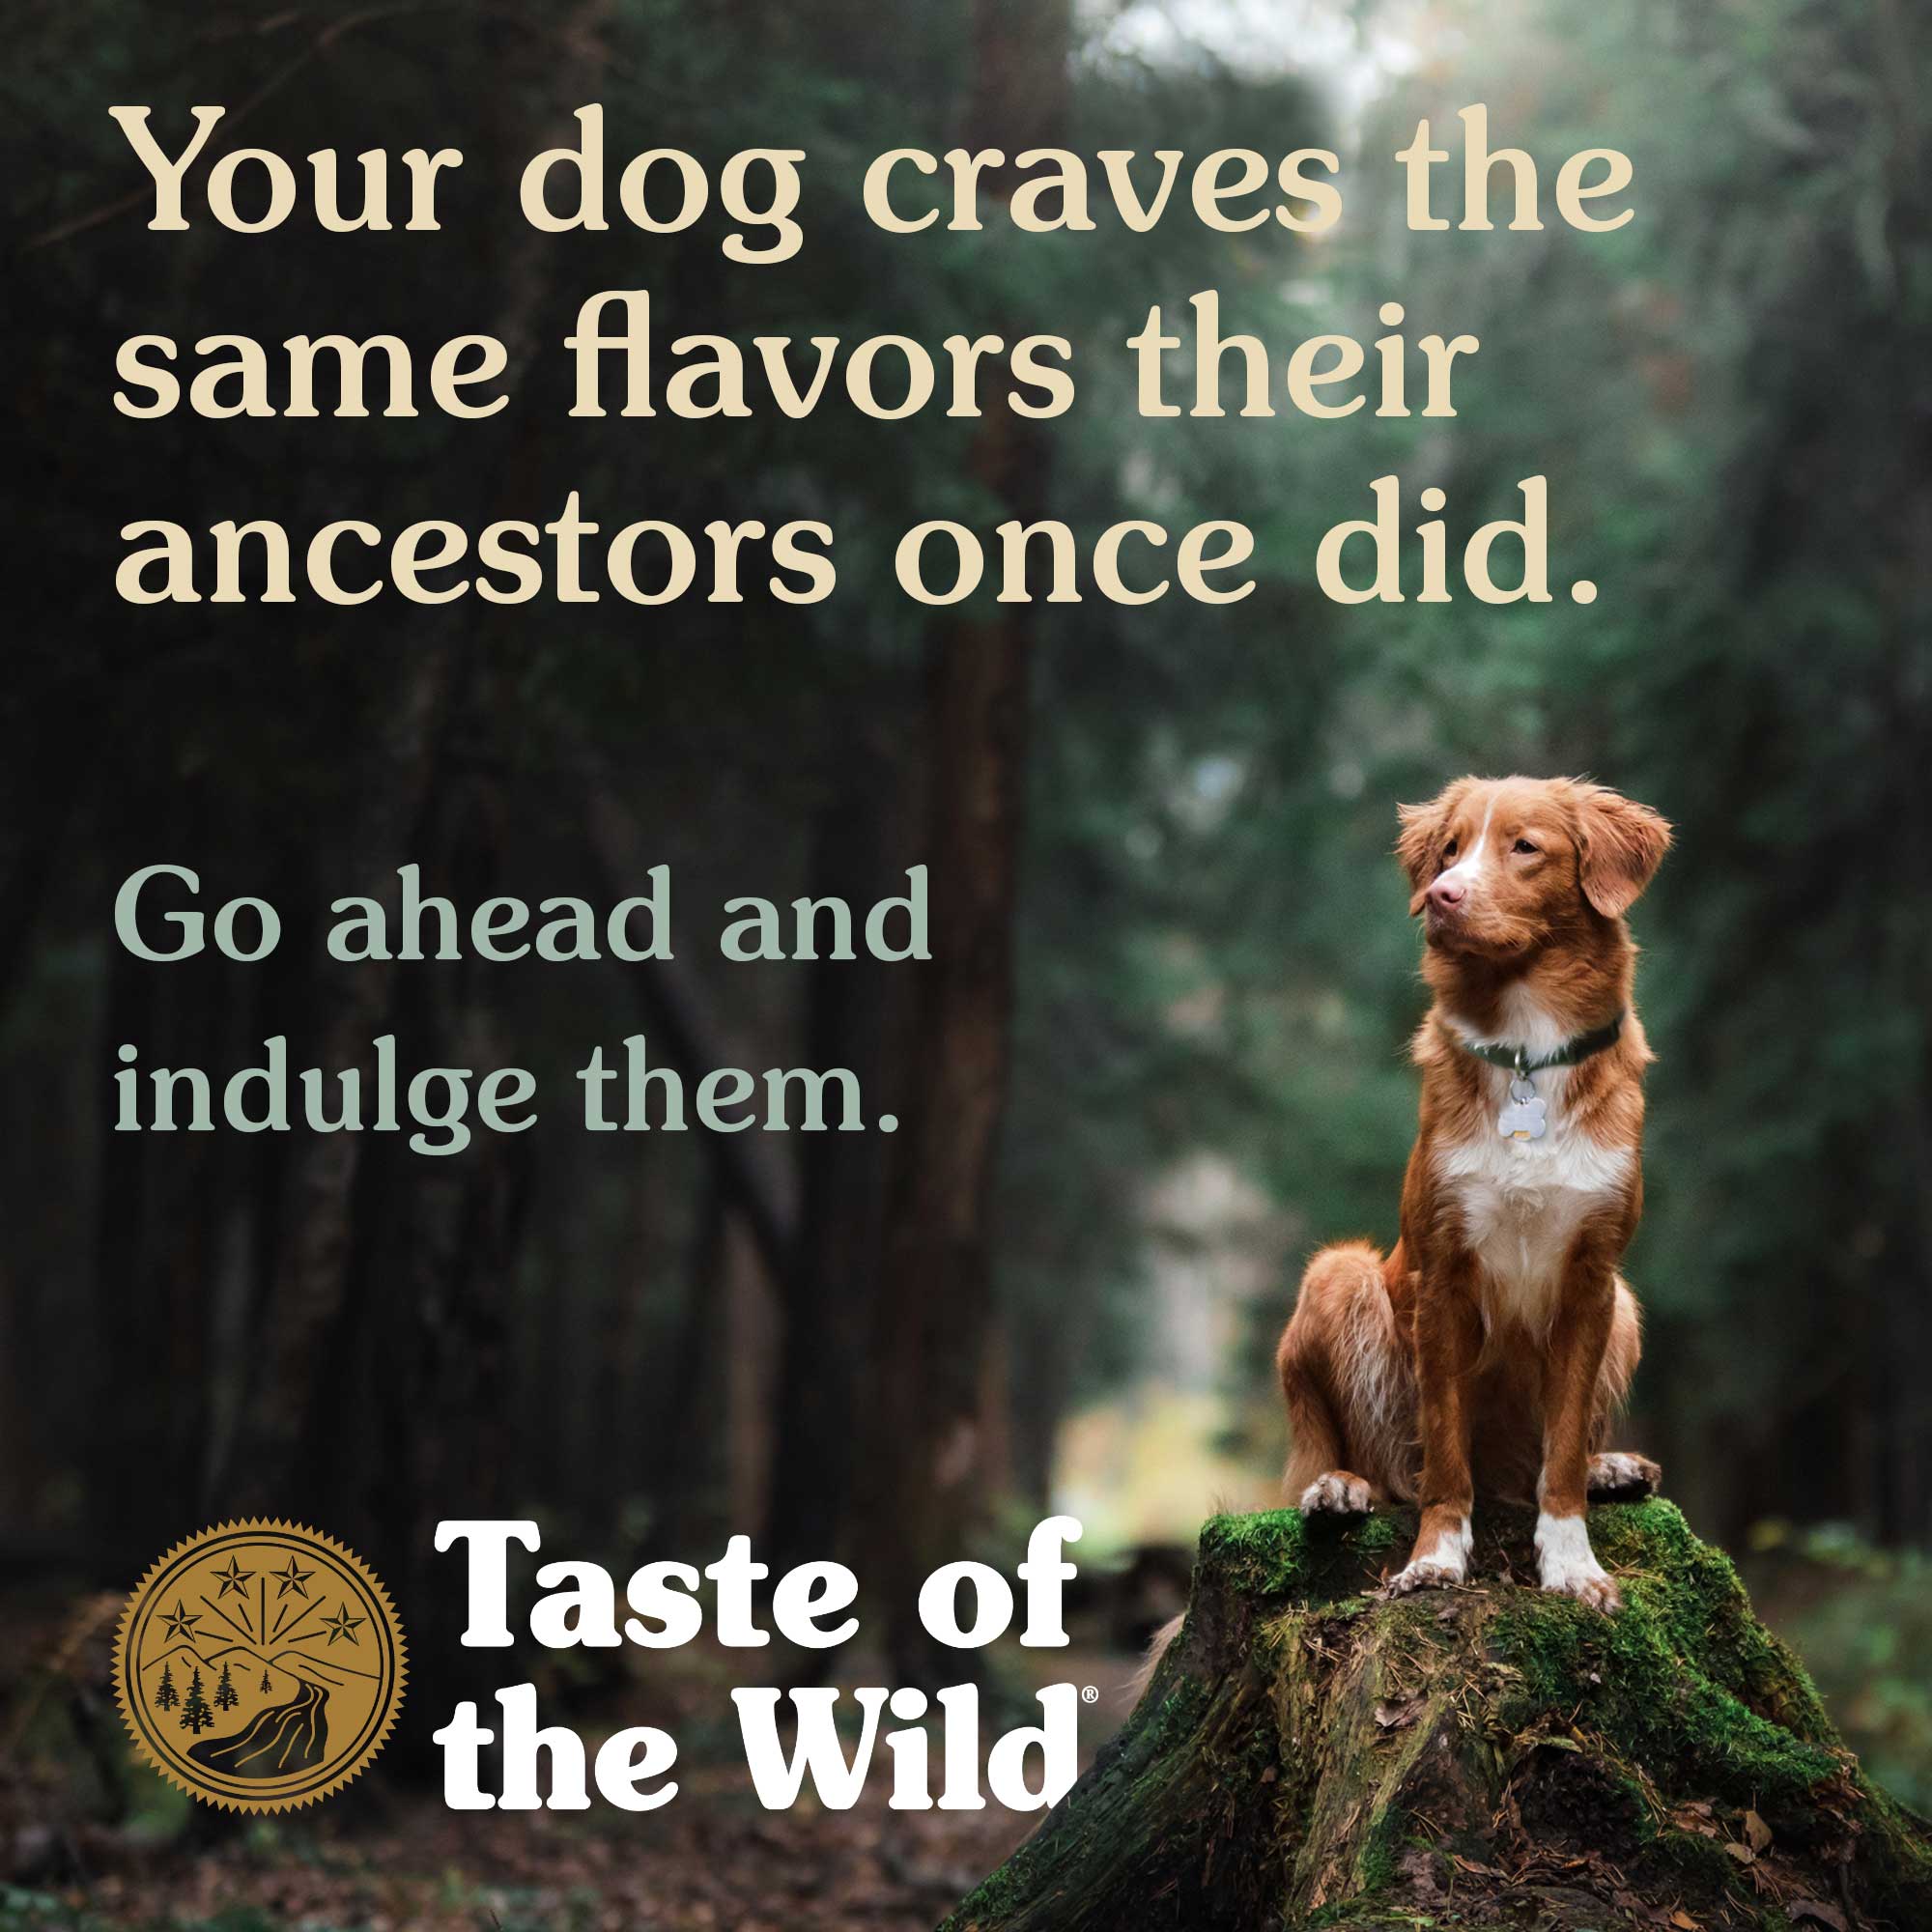 Taste Of The Wild Southwestern Canyon Grain-Free Dog Food - Mutts & Co.